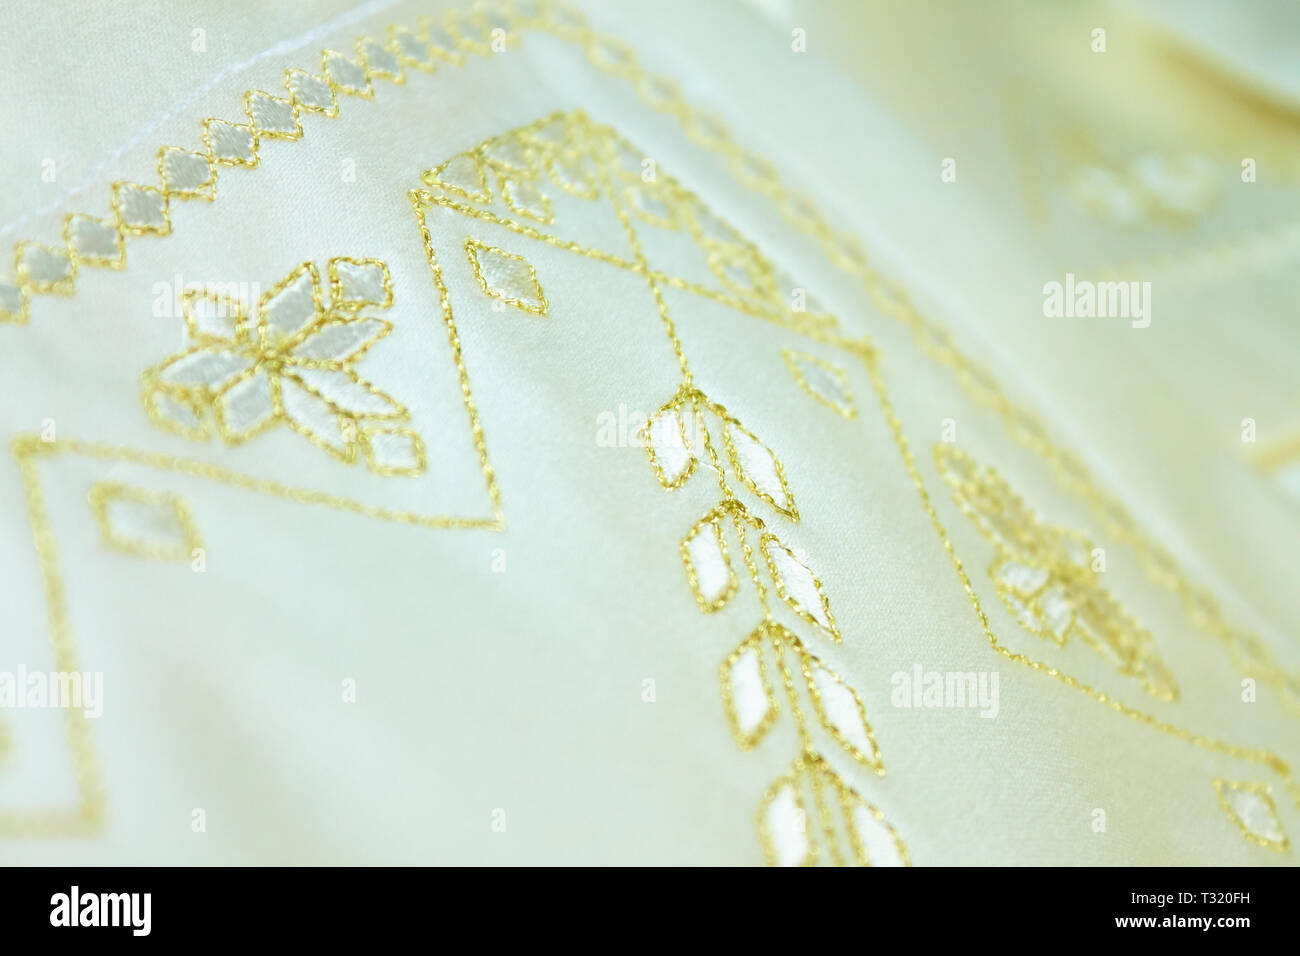 royal golden embroidery on white towel Stock Photo